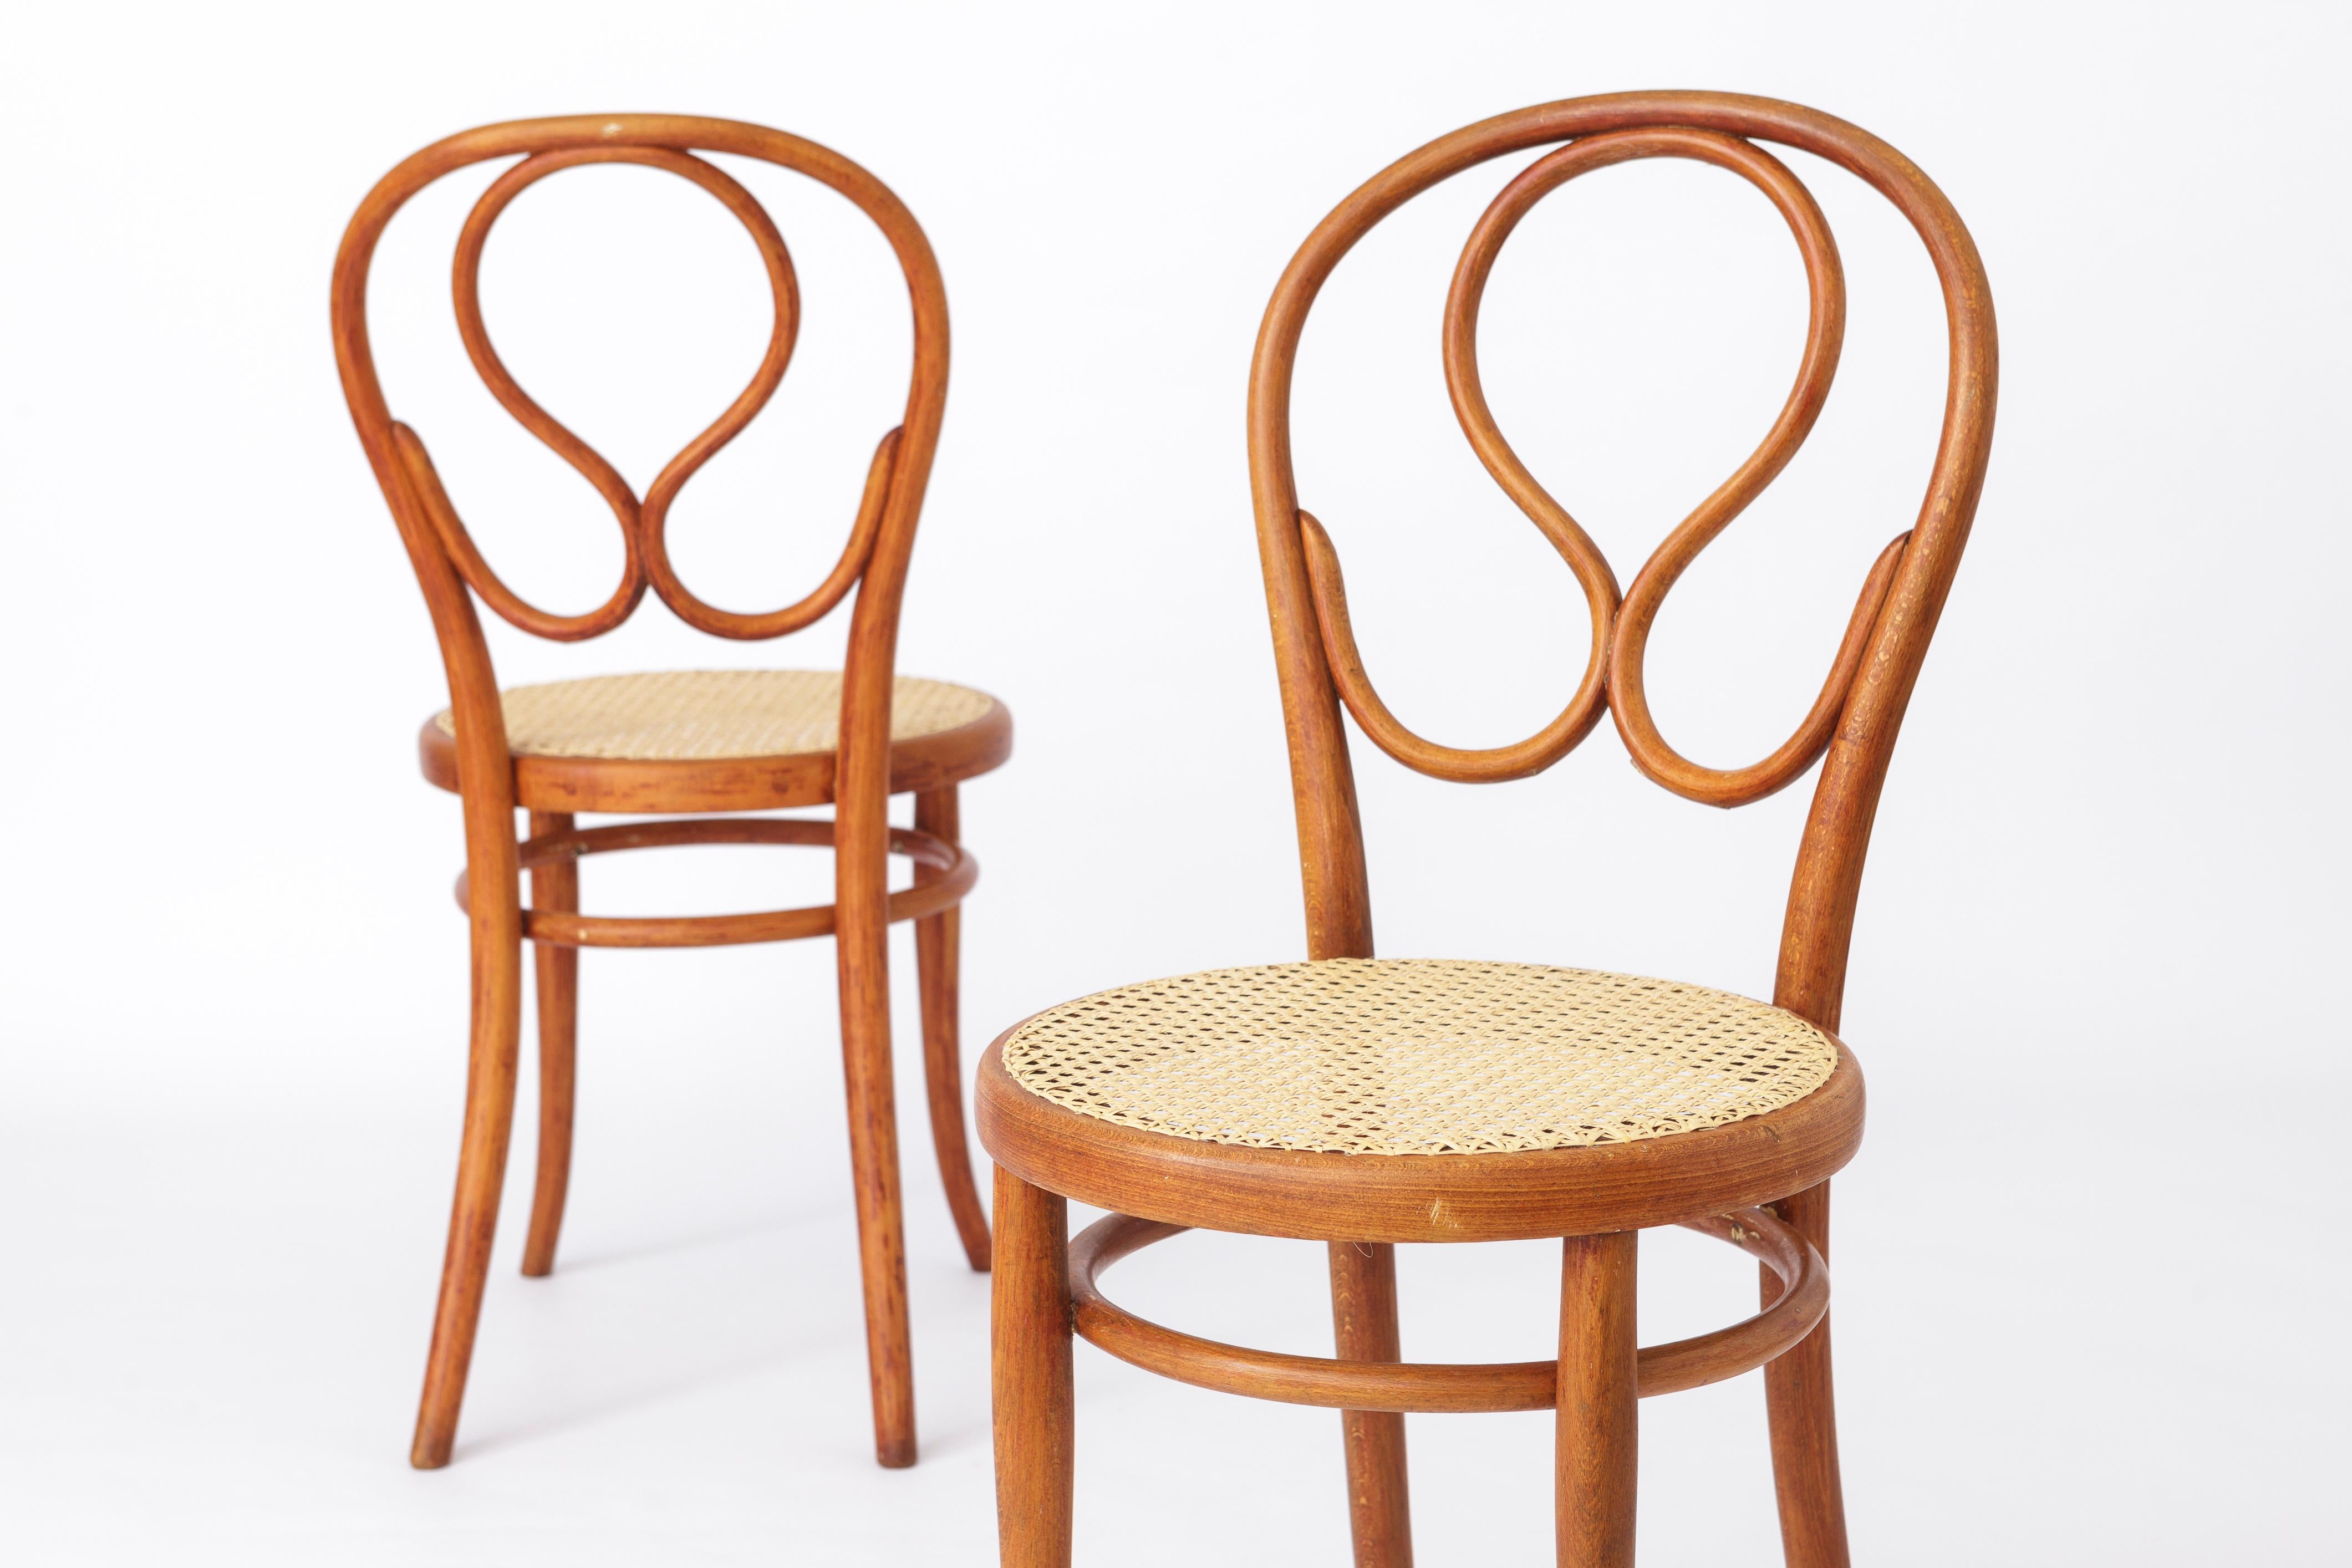 Teak Pair Thonet Cafe-Chairs approx. 1880s - Bentwood, Cane seat weaving